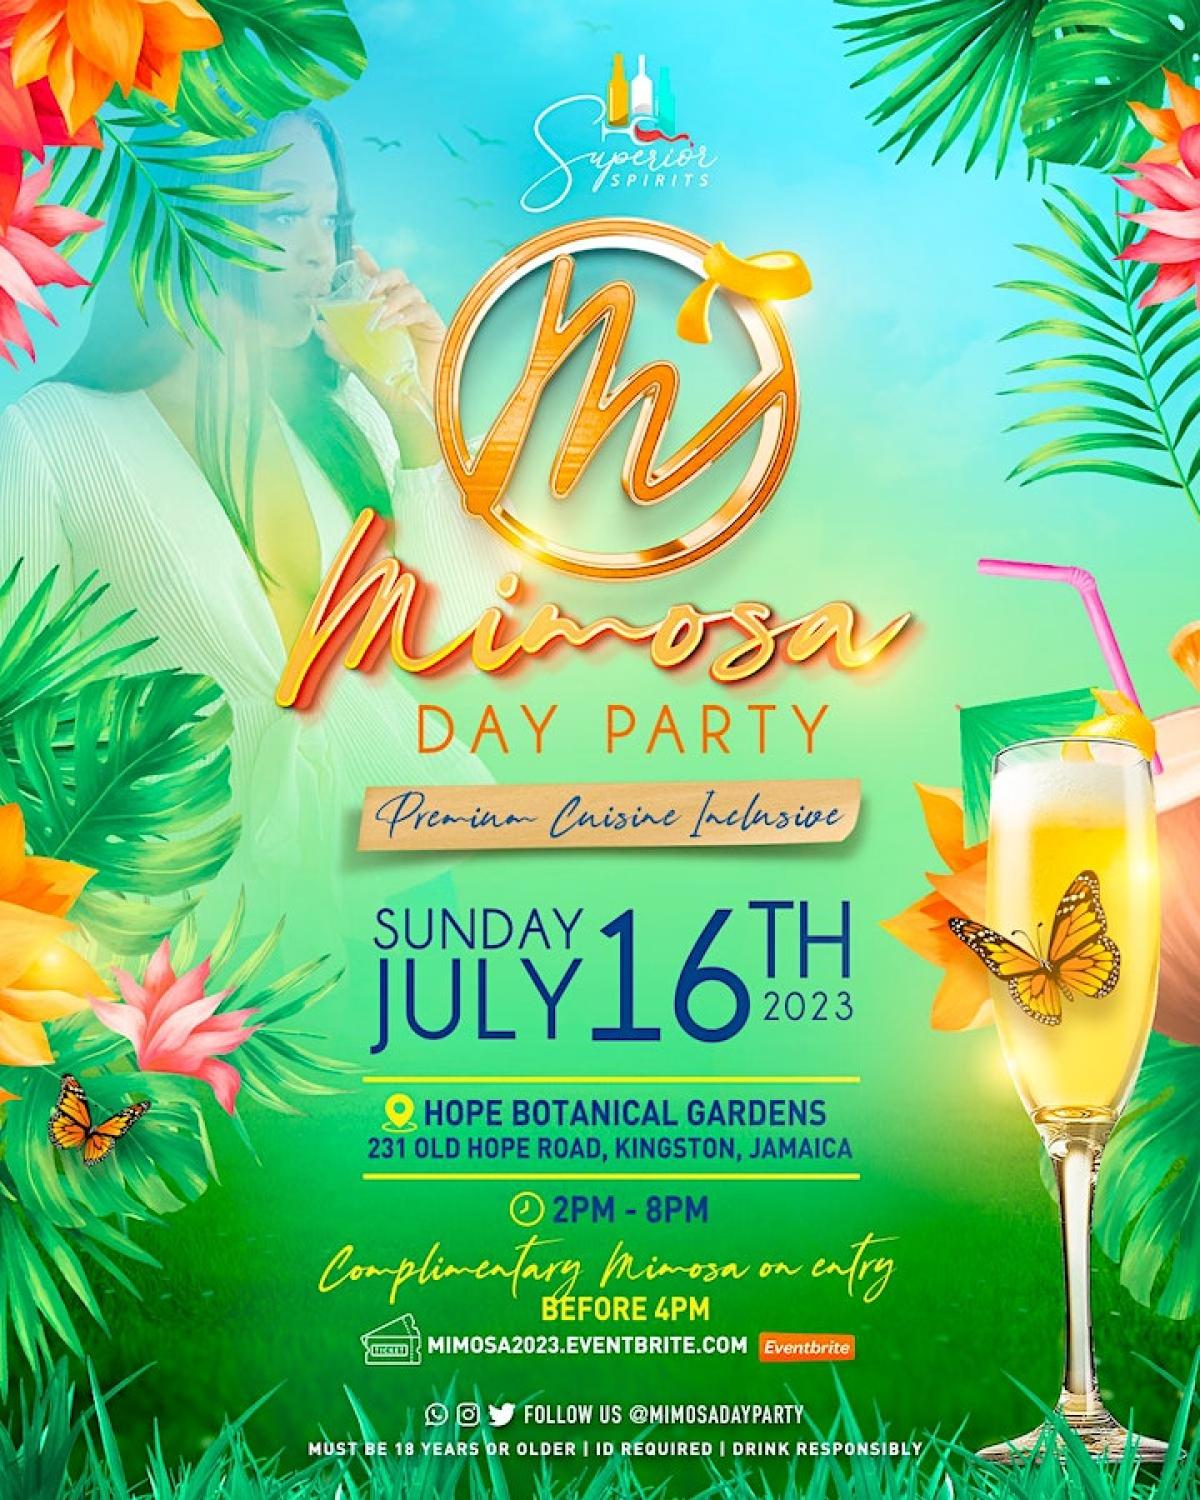 Mimosa - Day Party flyer or graphic.